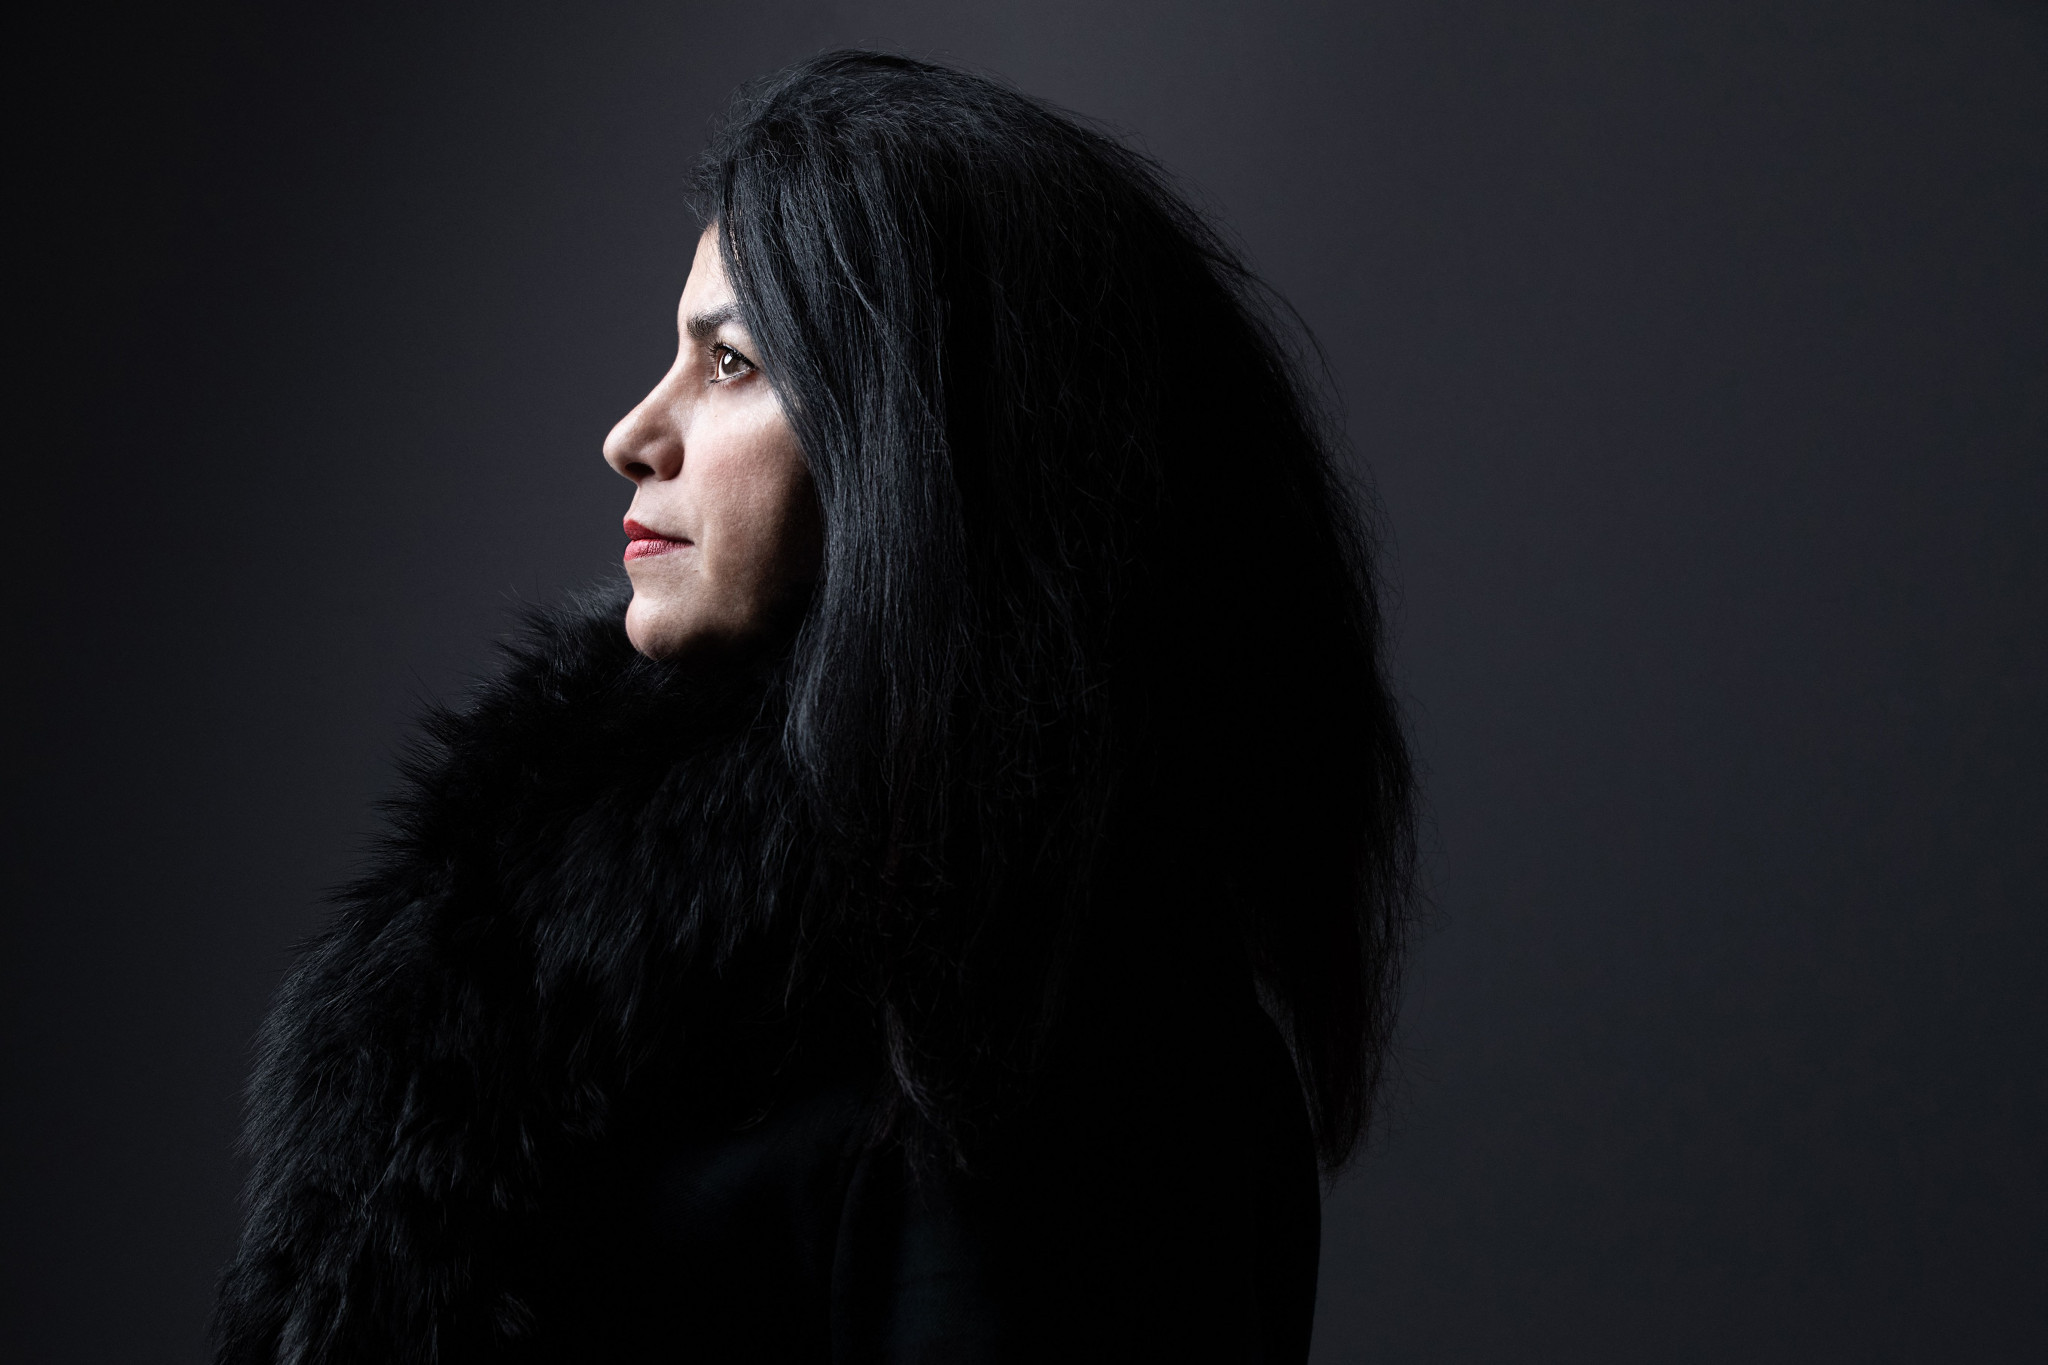 Iranian born graphic novellist Marjane Satrapi was selected to design the Paris 2024 tapestry because of her international reputation and values of universalism ©Getty Images